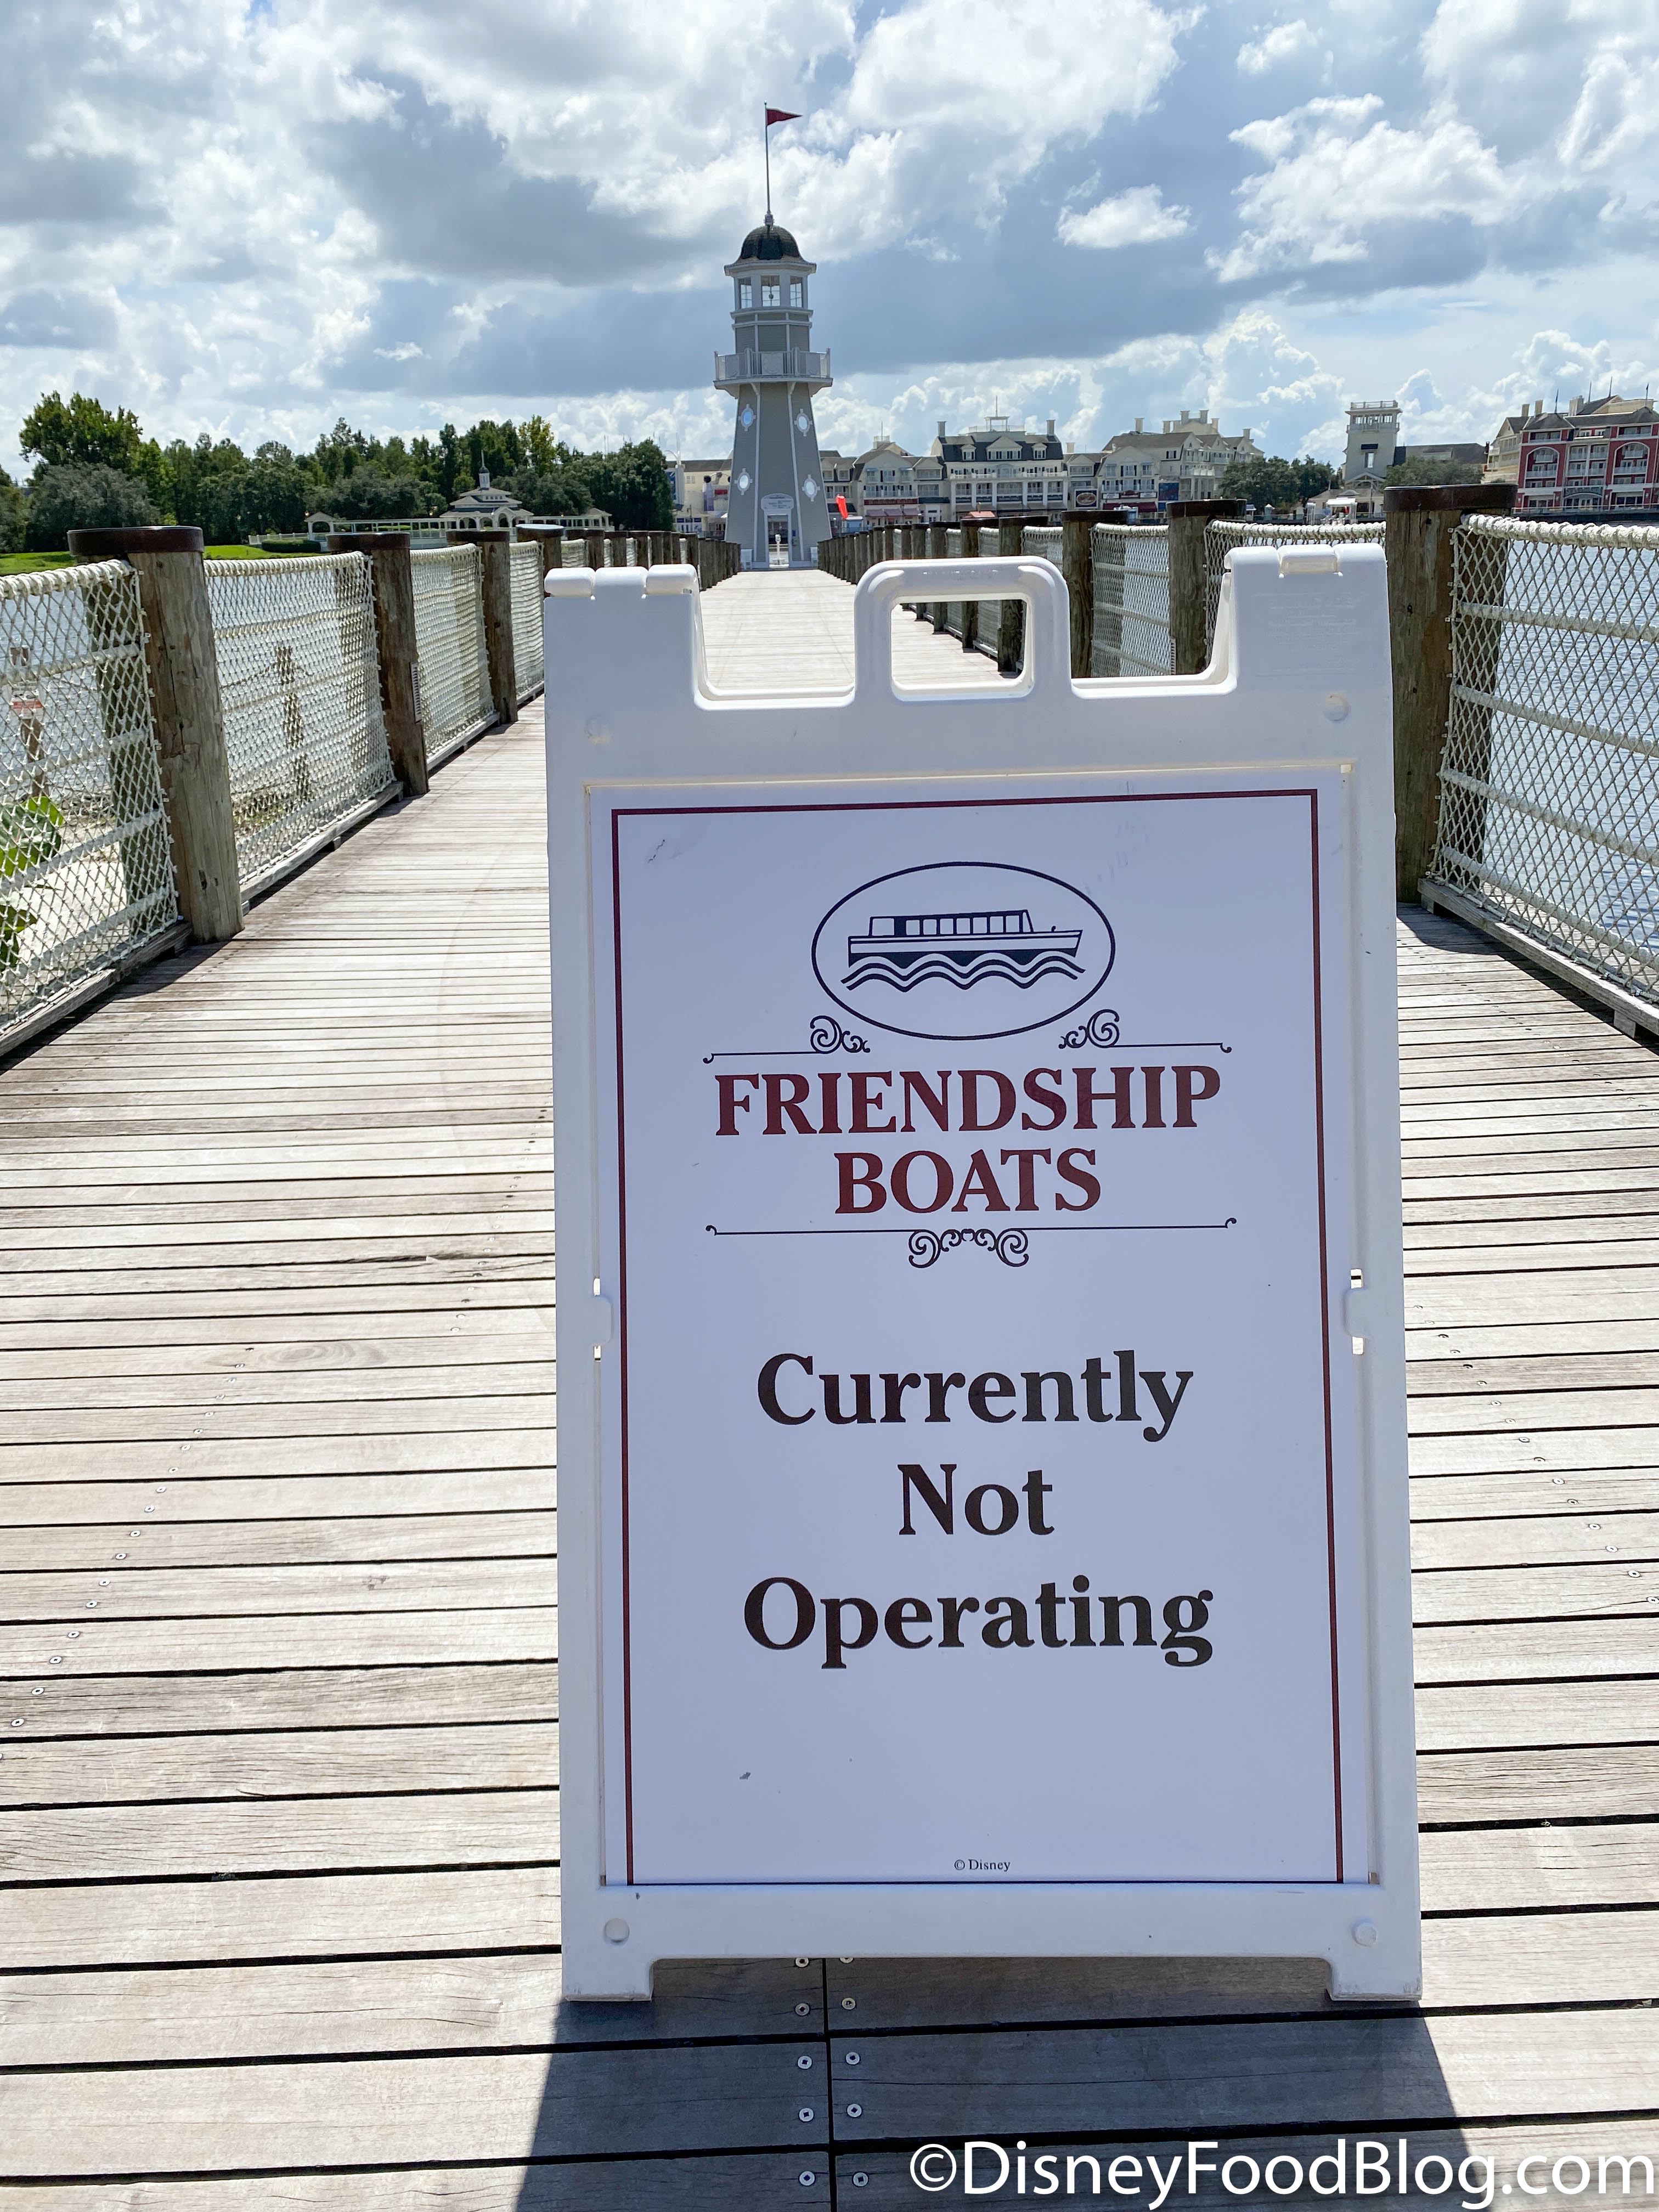 NEWS: Friendship Boats Are Set to Resume Service in Disney World Soon